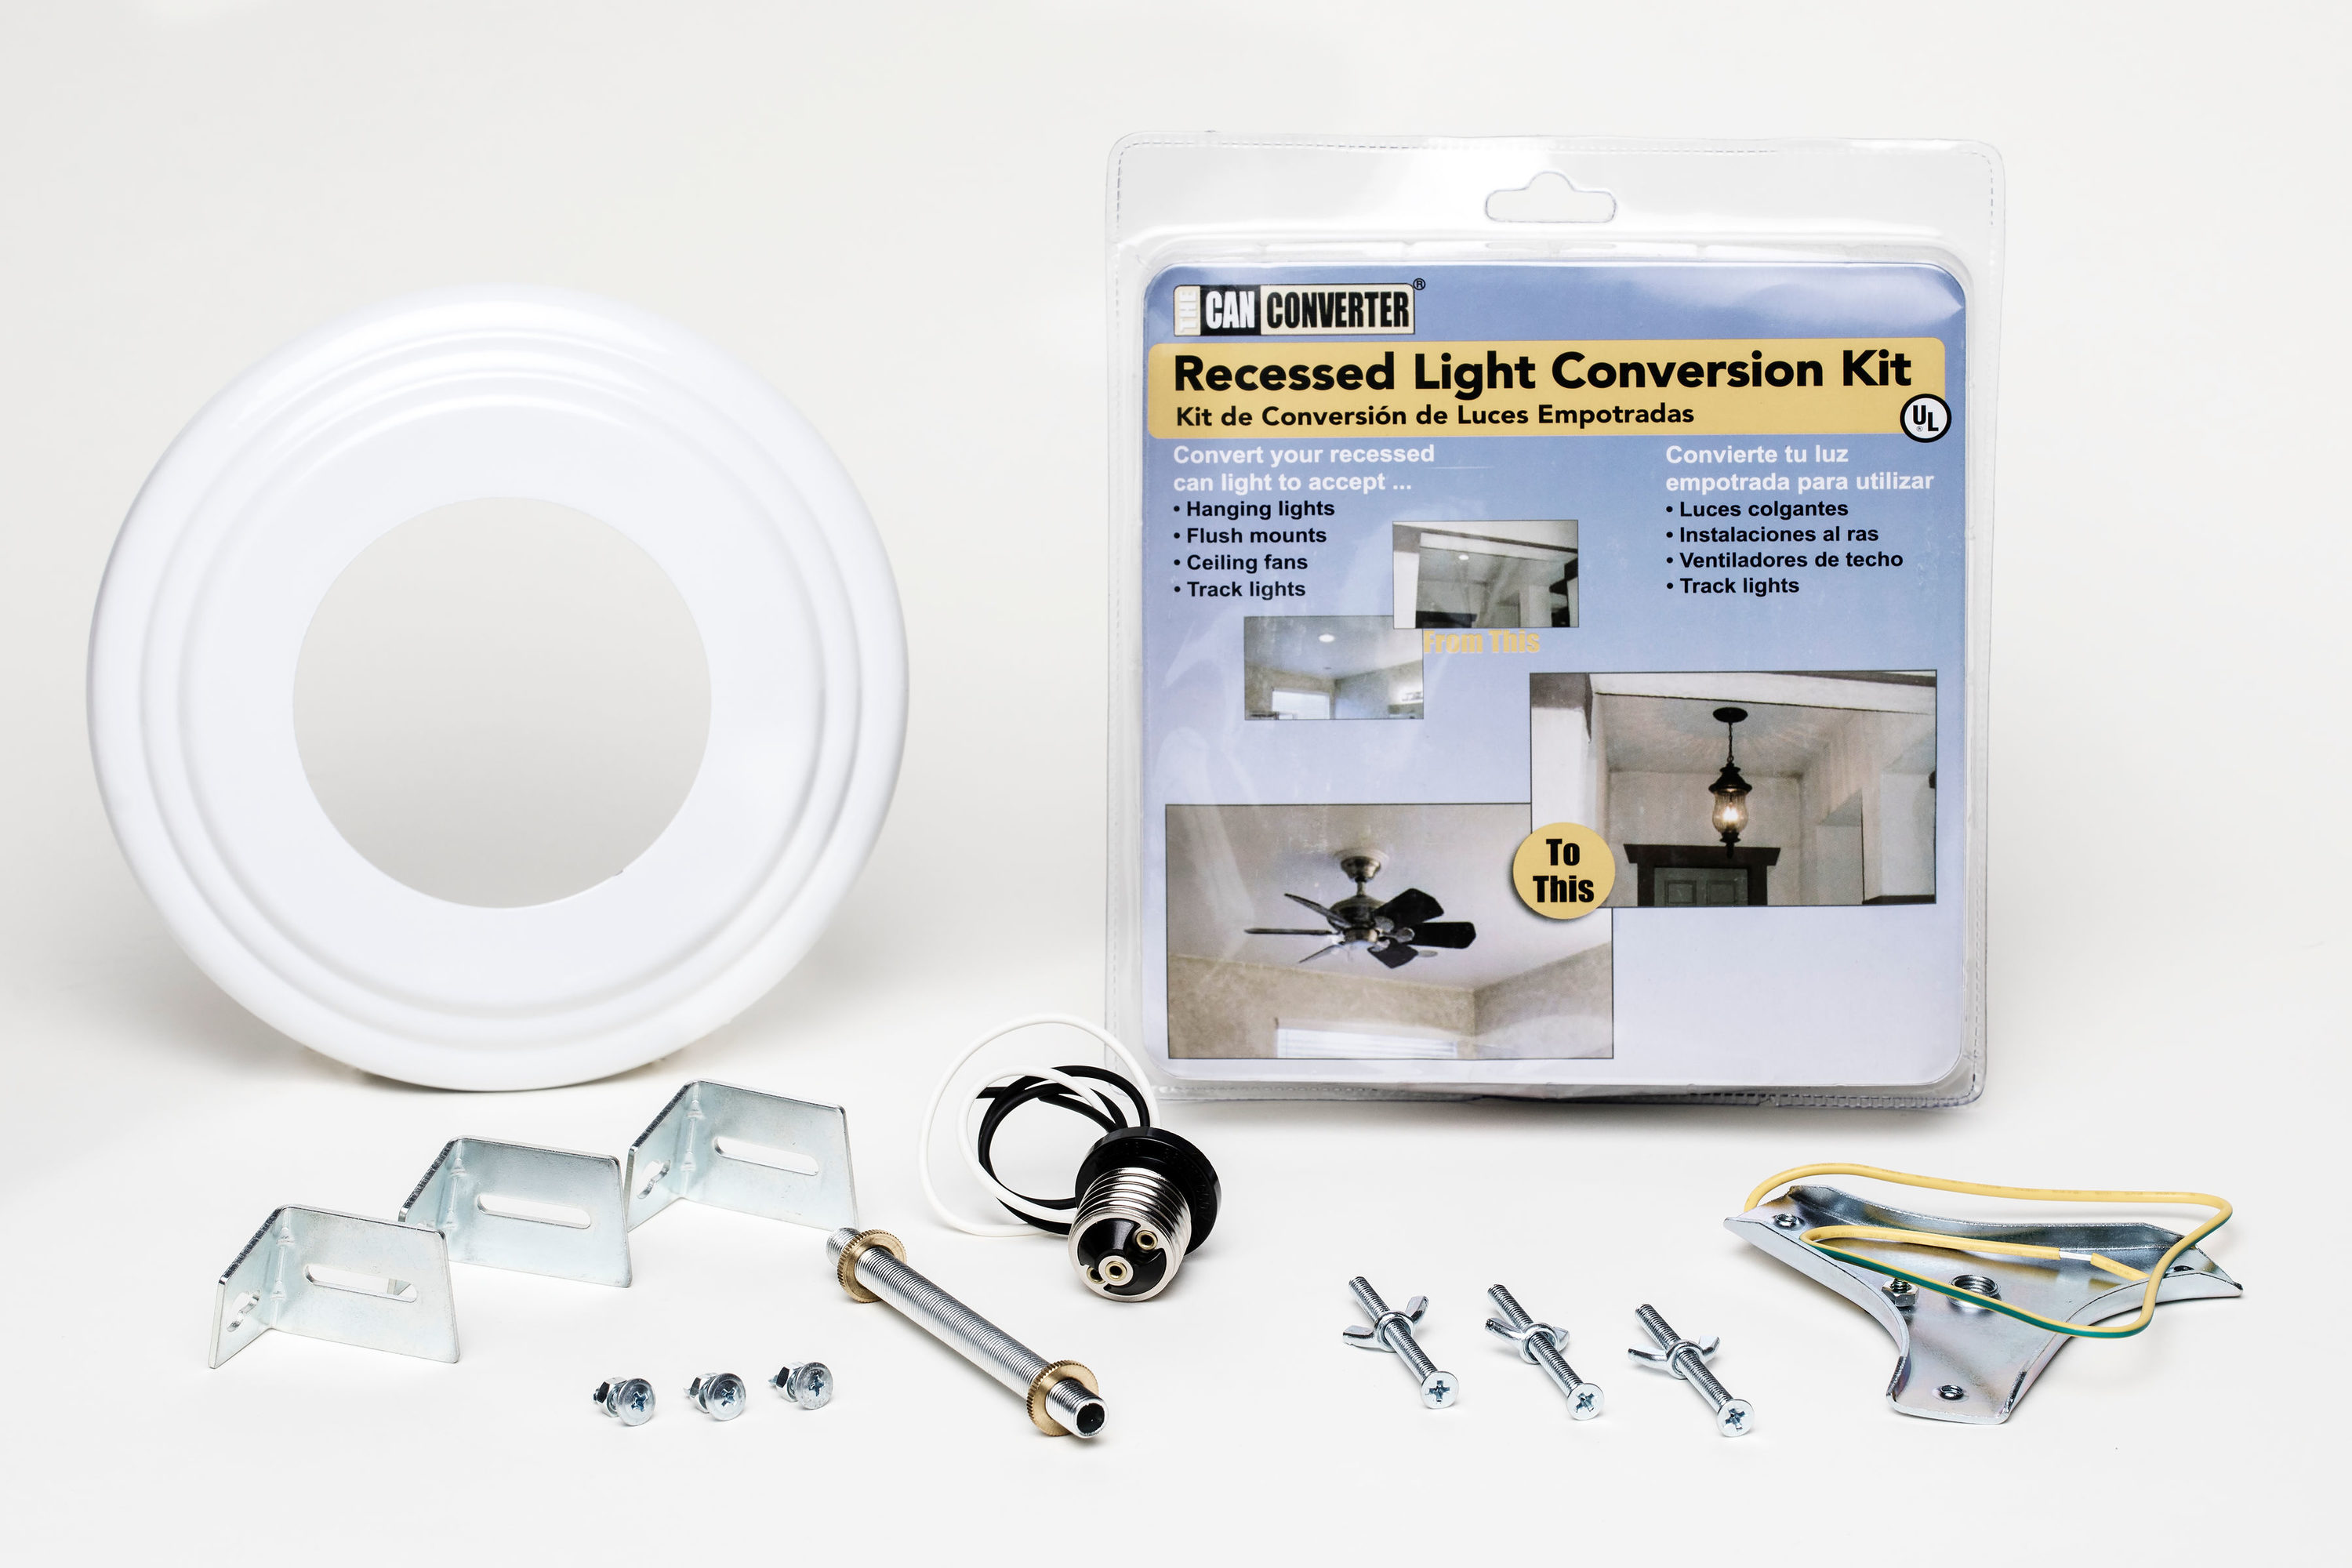 Recessed Light Kits Department At Lowes